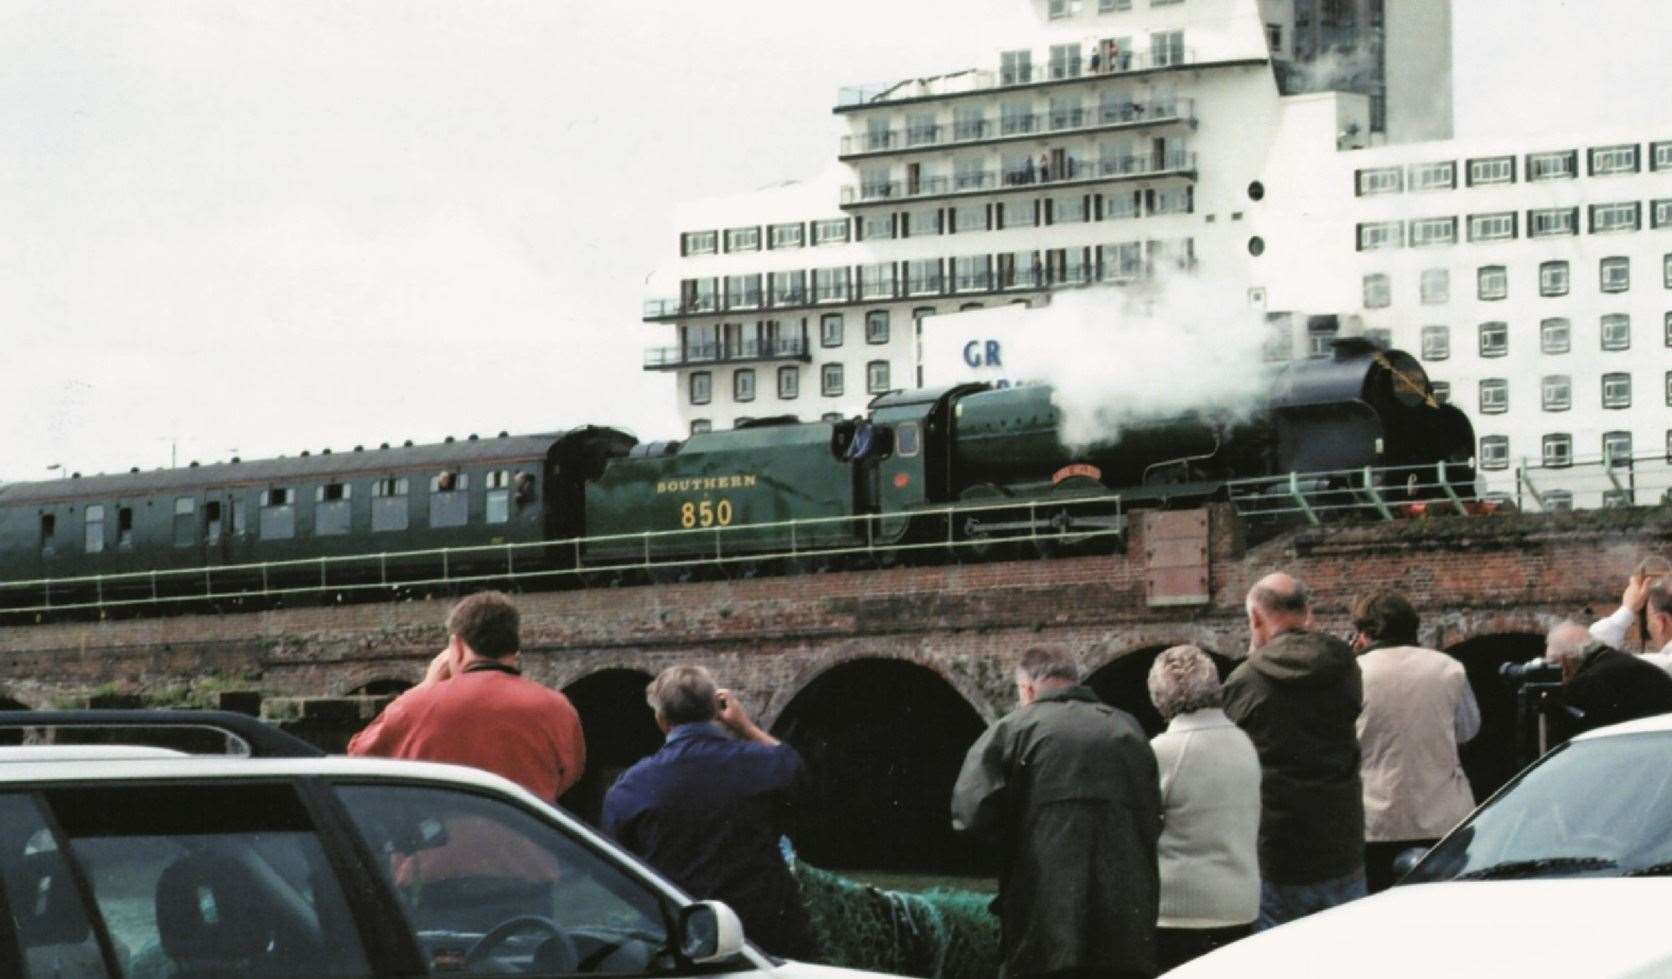 The steam train Lord Nelson on the harbour branch line being operated as the Golden Arrow, August 2007. The Burstin Hotel in the background